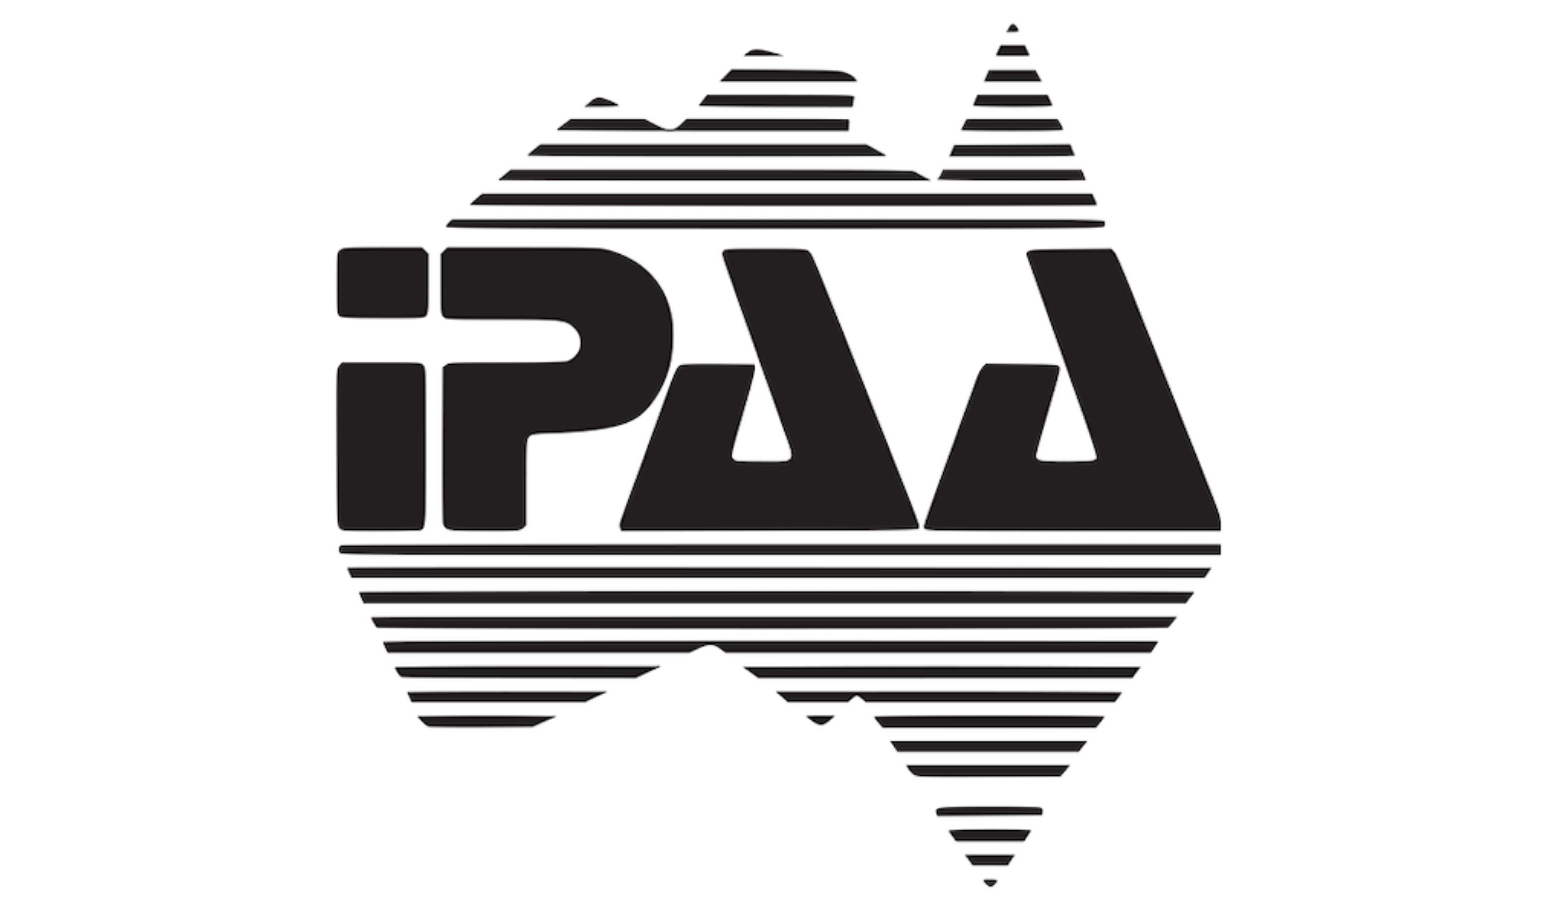 The old black-and-white IPAA logo featuring the letters "IPAA" rendered in a heavy, angular typeface reminiscent of a style popular in the 1980s, overlaid atop a stylized map of Australia filled in with vertical stripes.